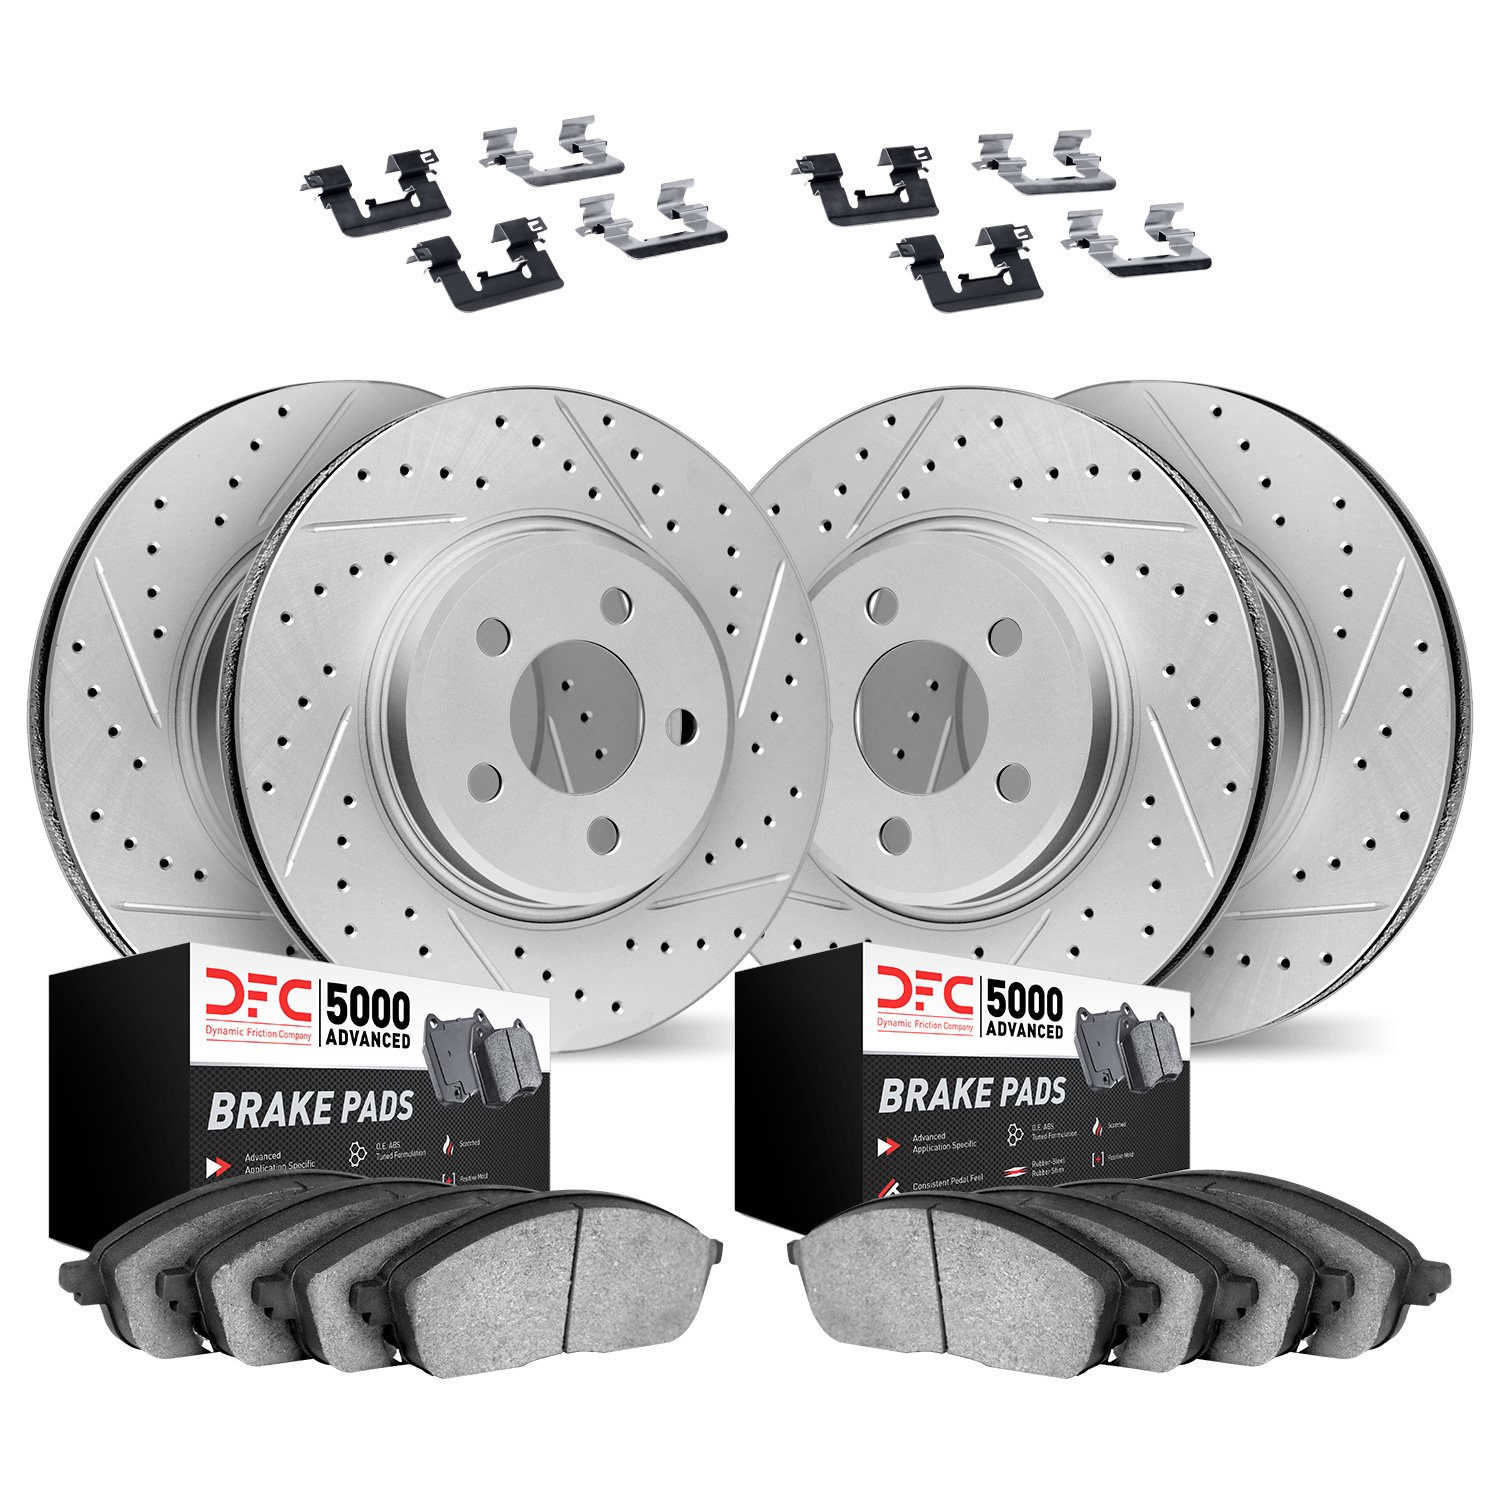 2514-31073 Geoperformance Drilled/Slotted Rotors w/5000 Advanced Brake Pads Kit & Hardware, 2008-2014 BMW, Position: Front and R